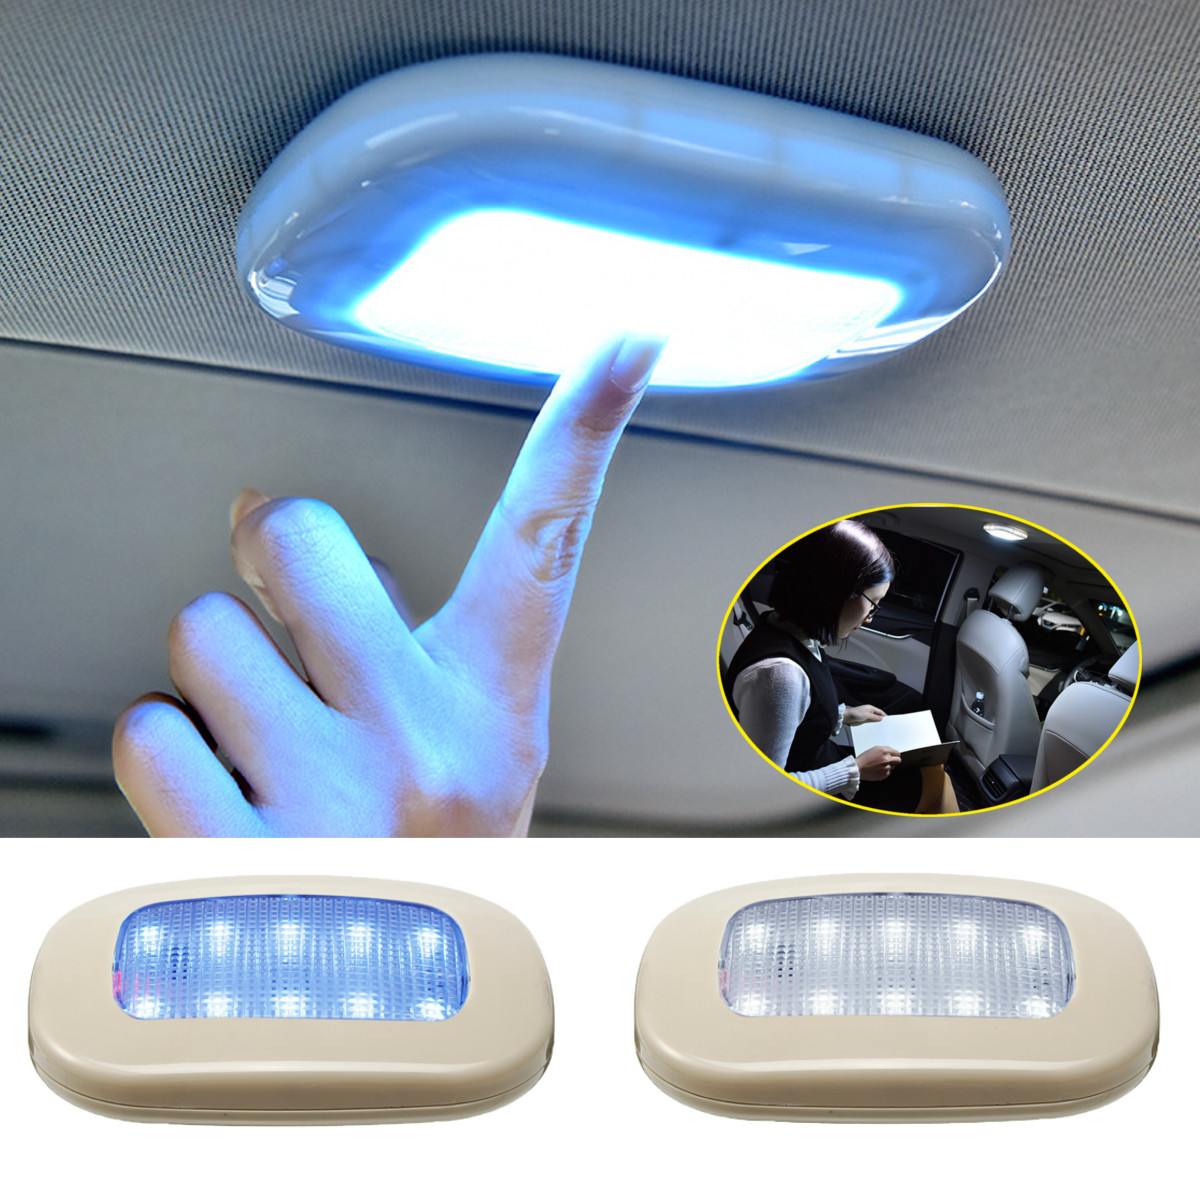 

Universal 10-LED Car Vehicle Interior Indoor Roof Ceiling Dome Light Home Lamp